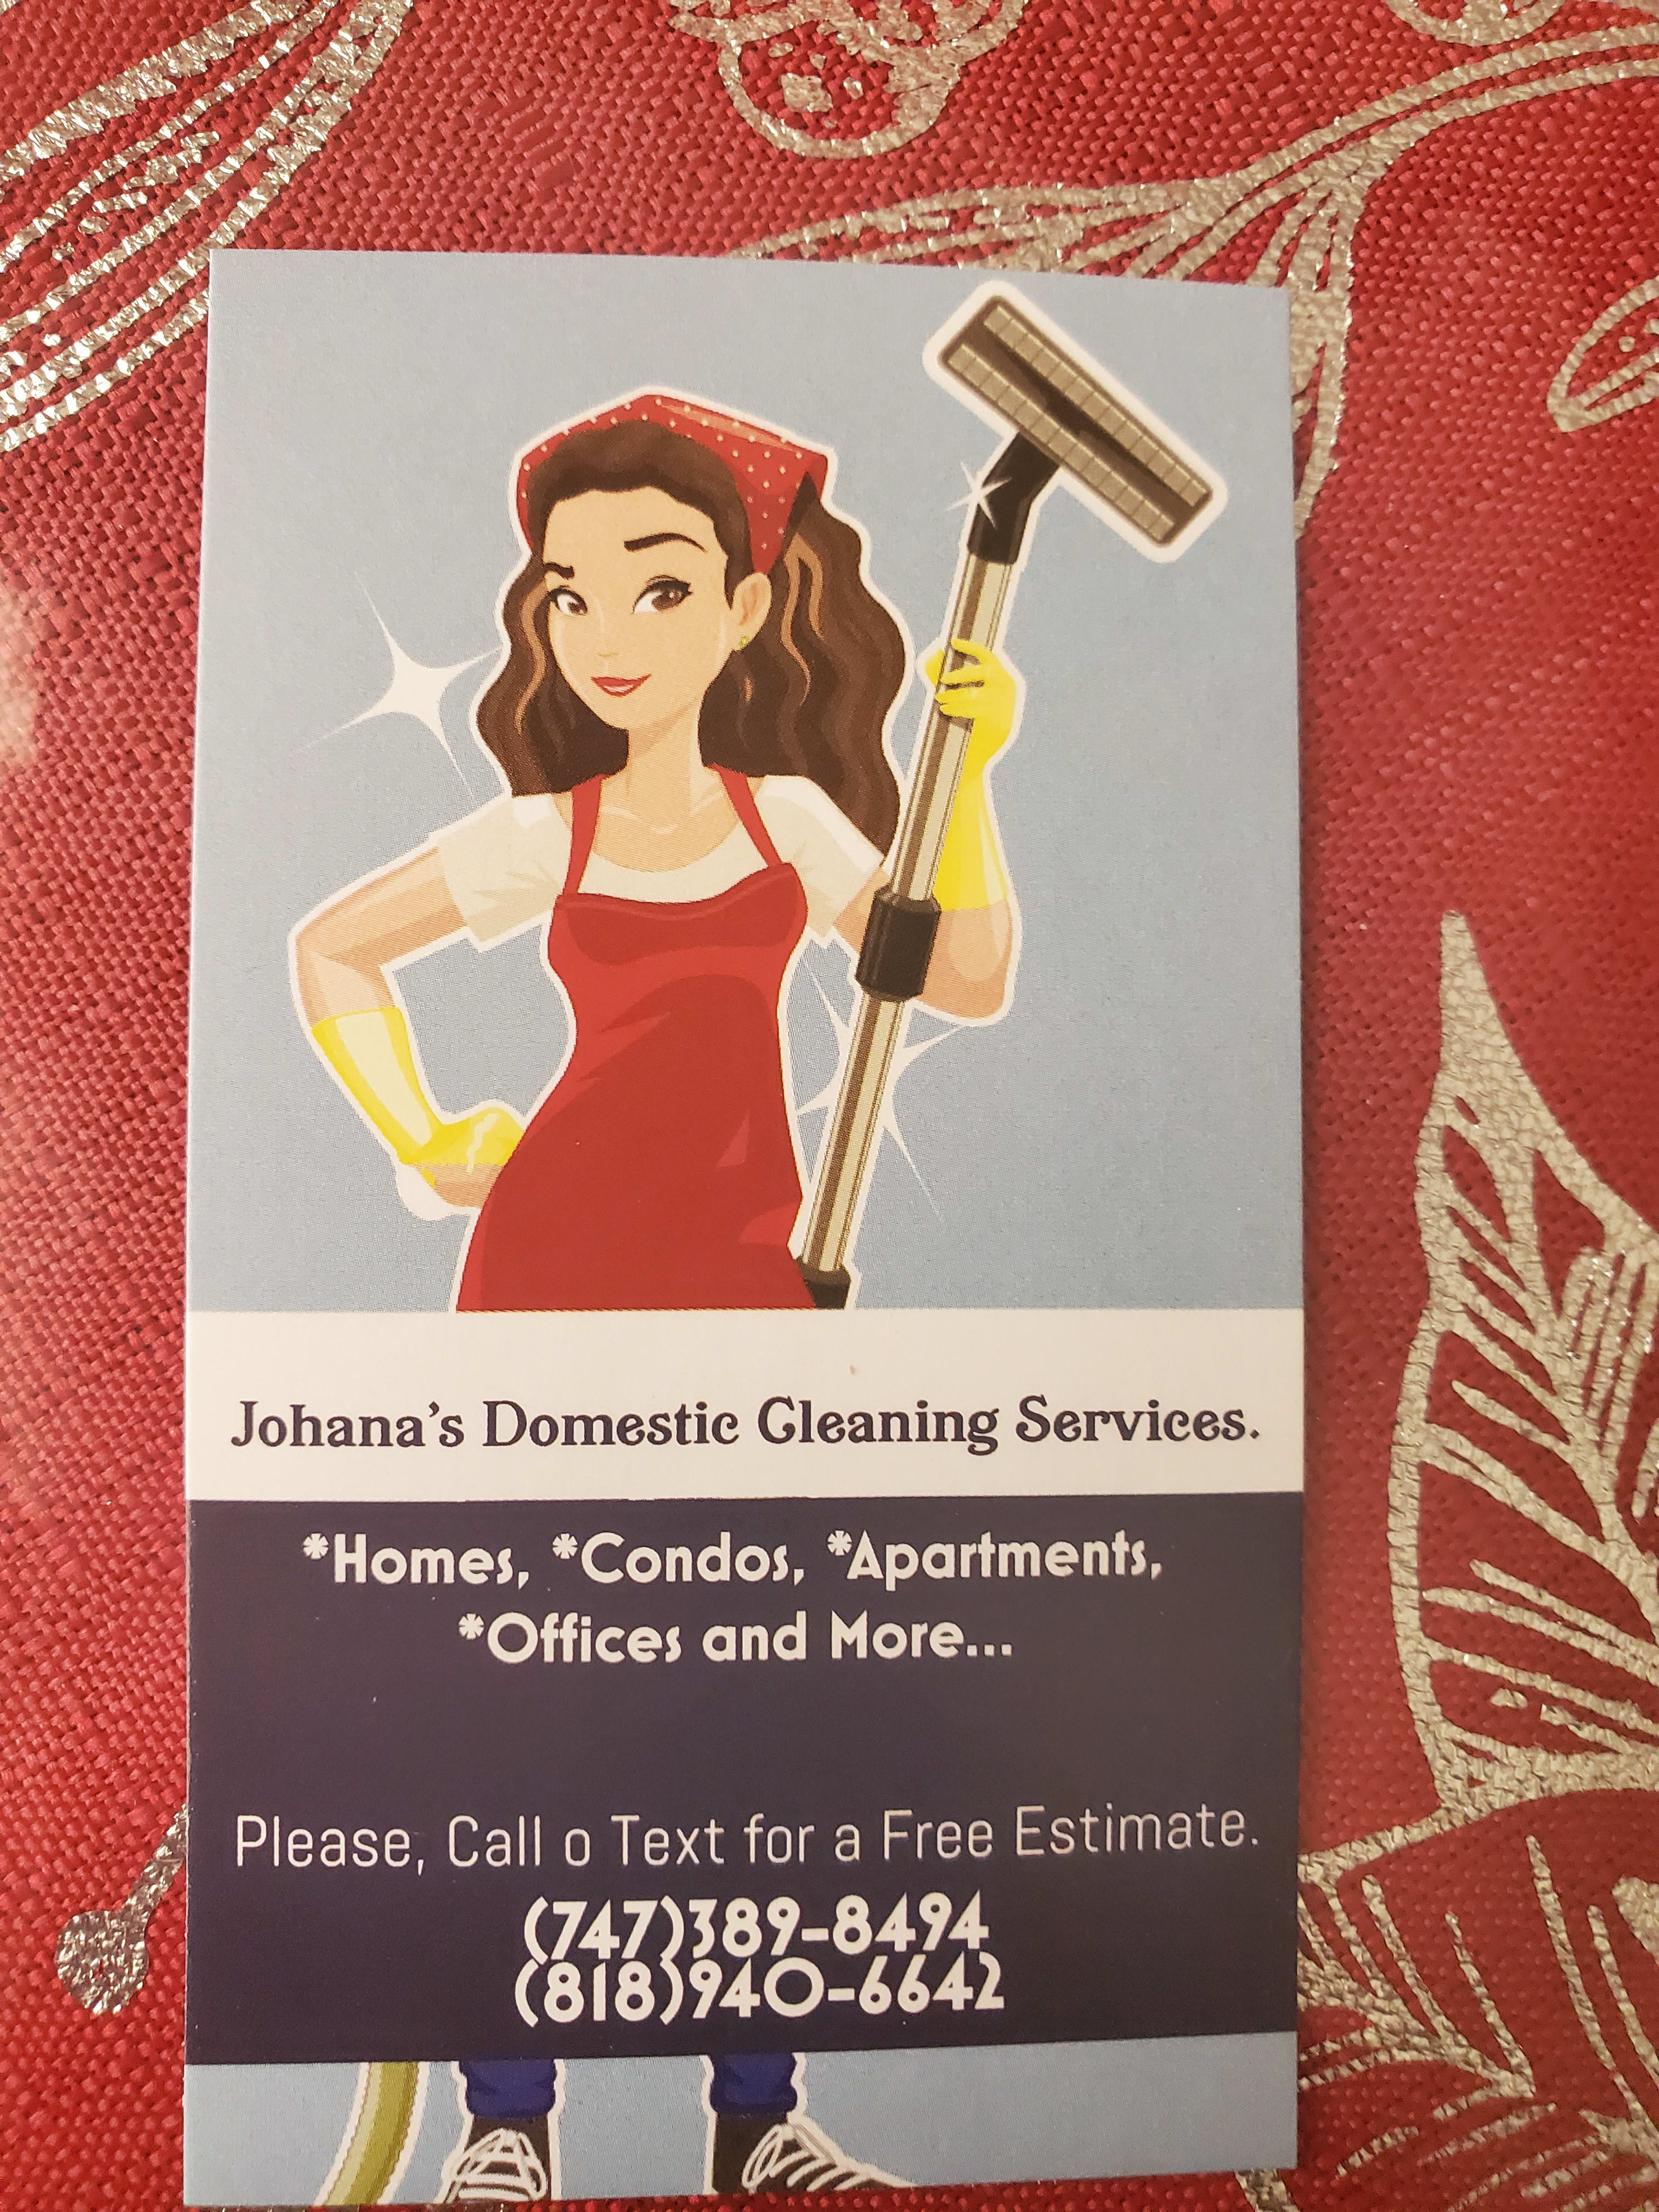 Johana's Domestic Cleaning Services